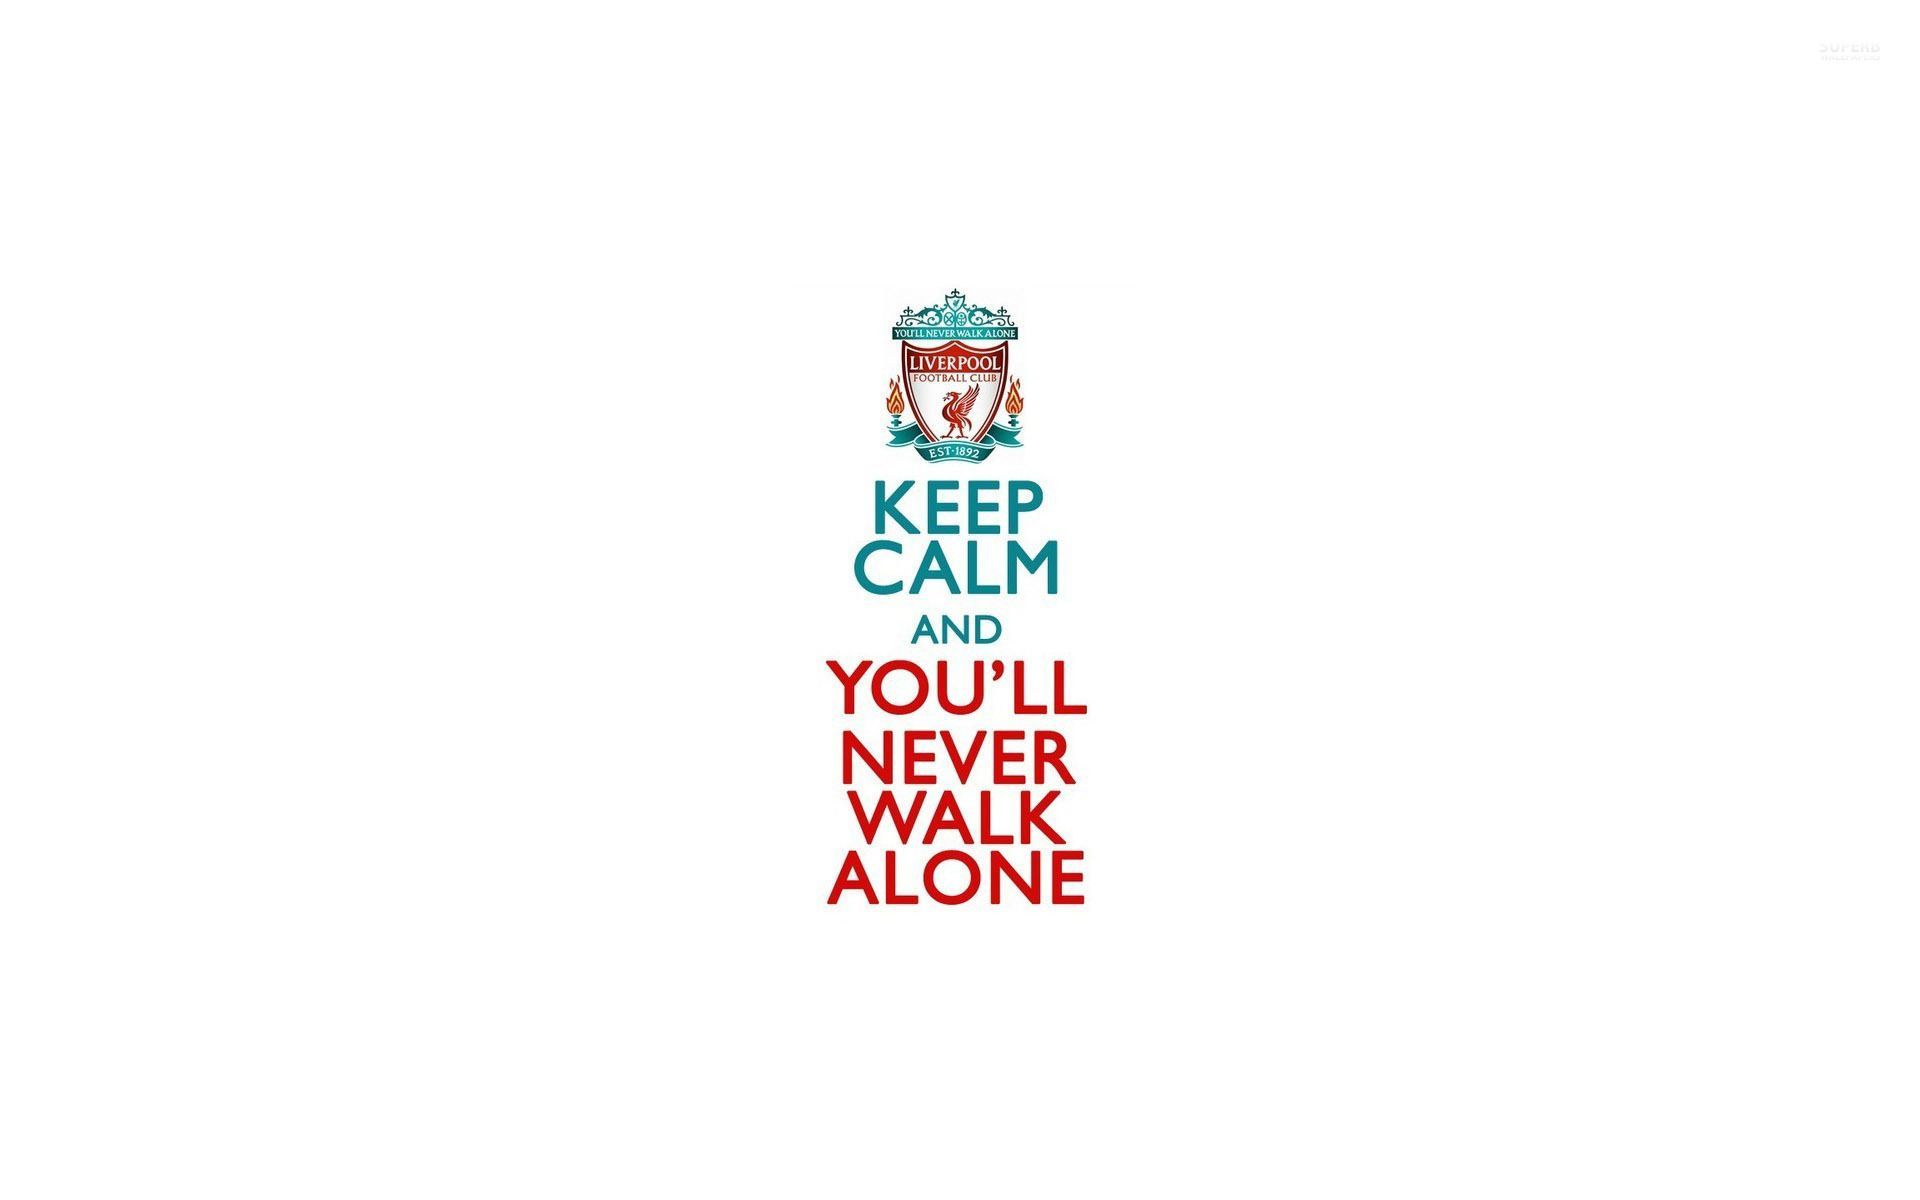 Keep Calm an you'll never walk alone wallpaper - Typography ...